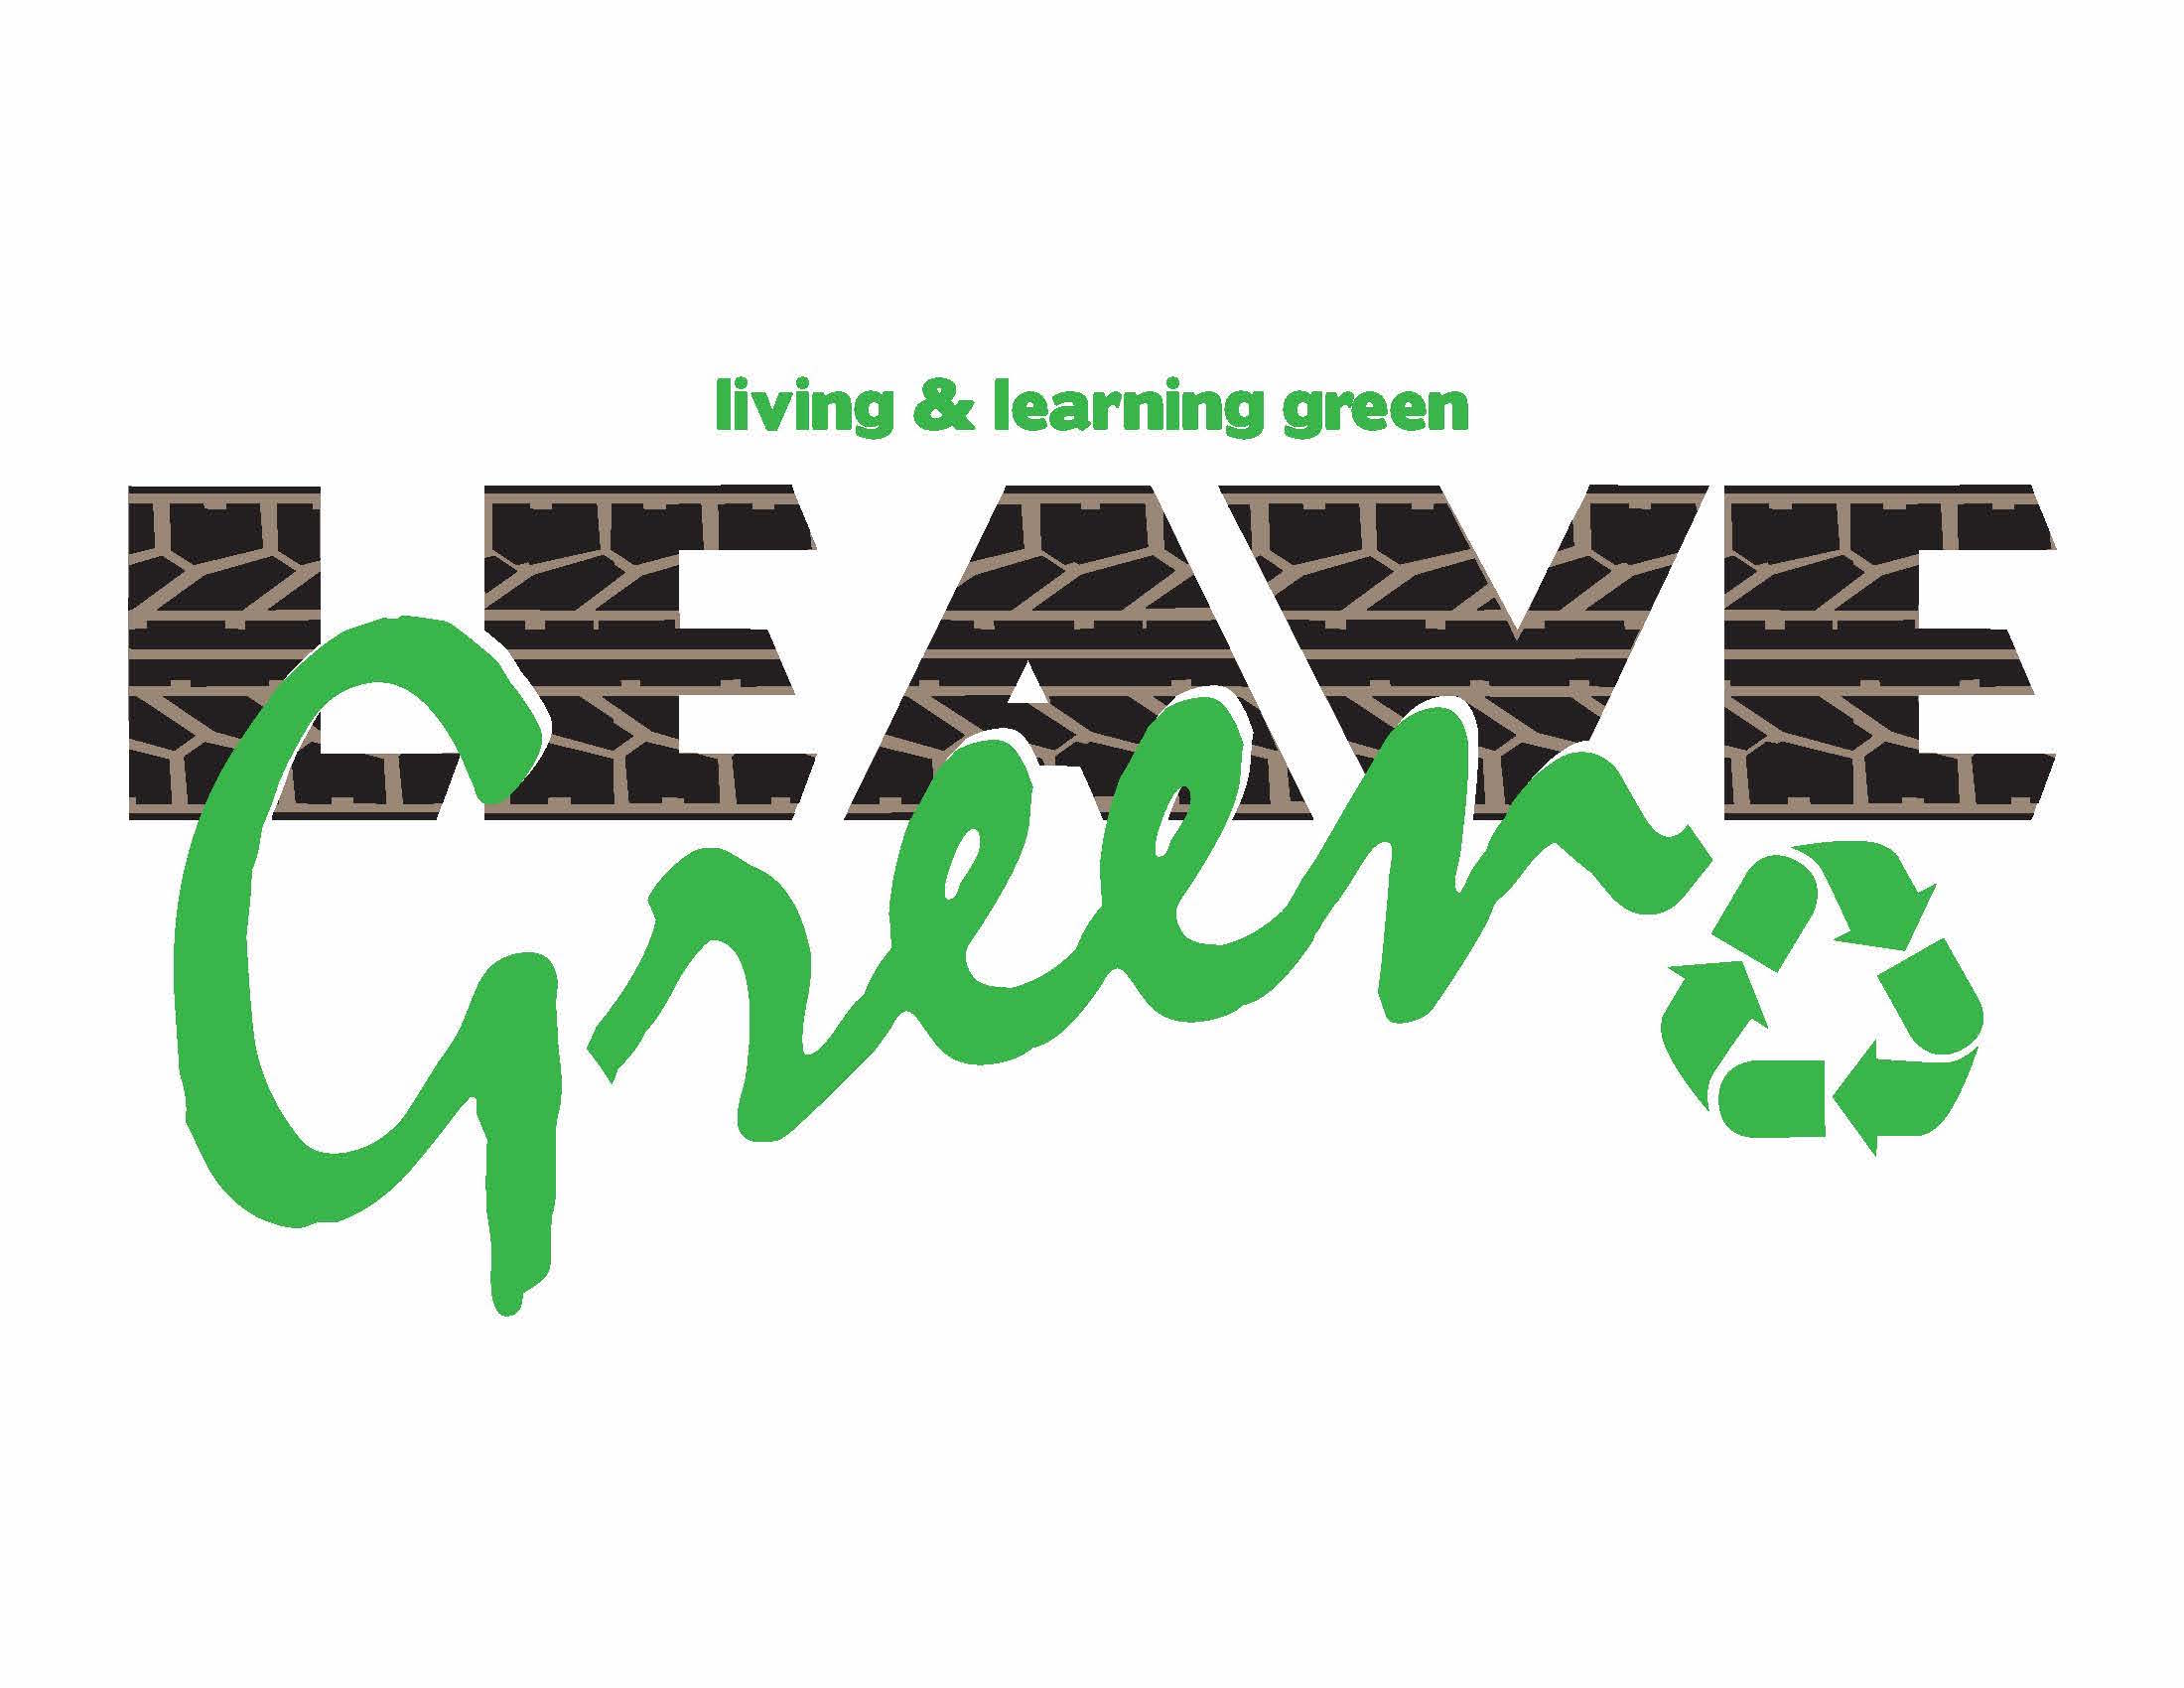 Leave Green: Application Open for 2016 Donation of Items